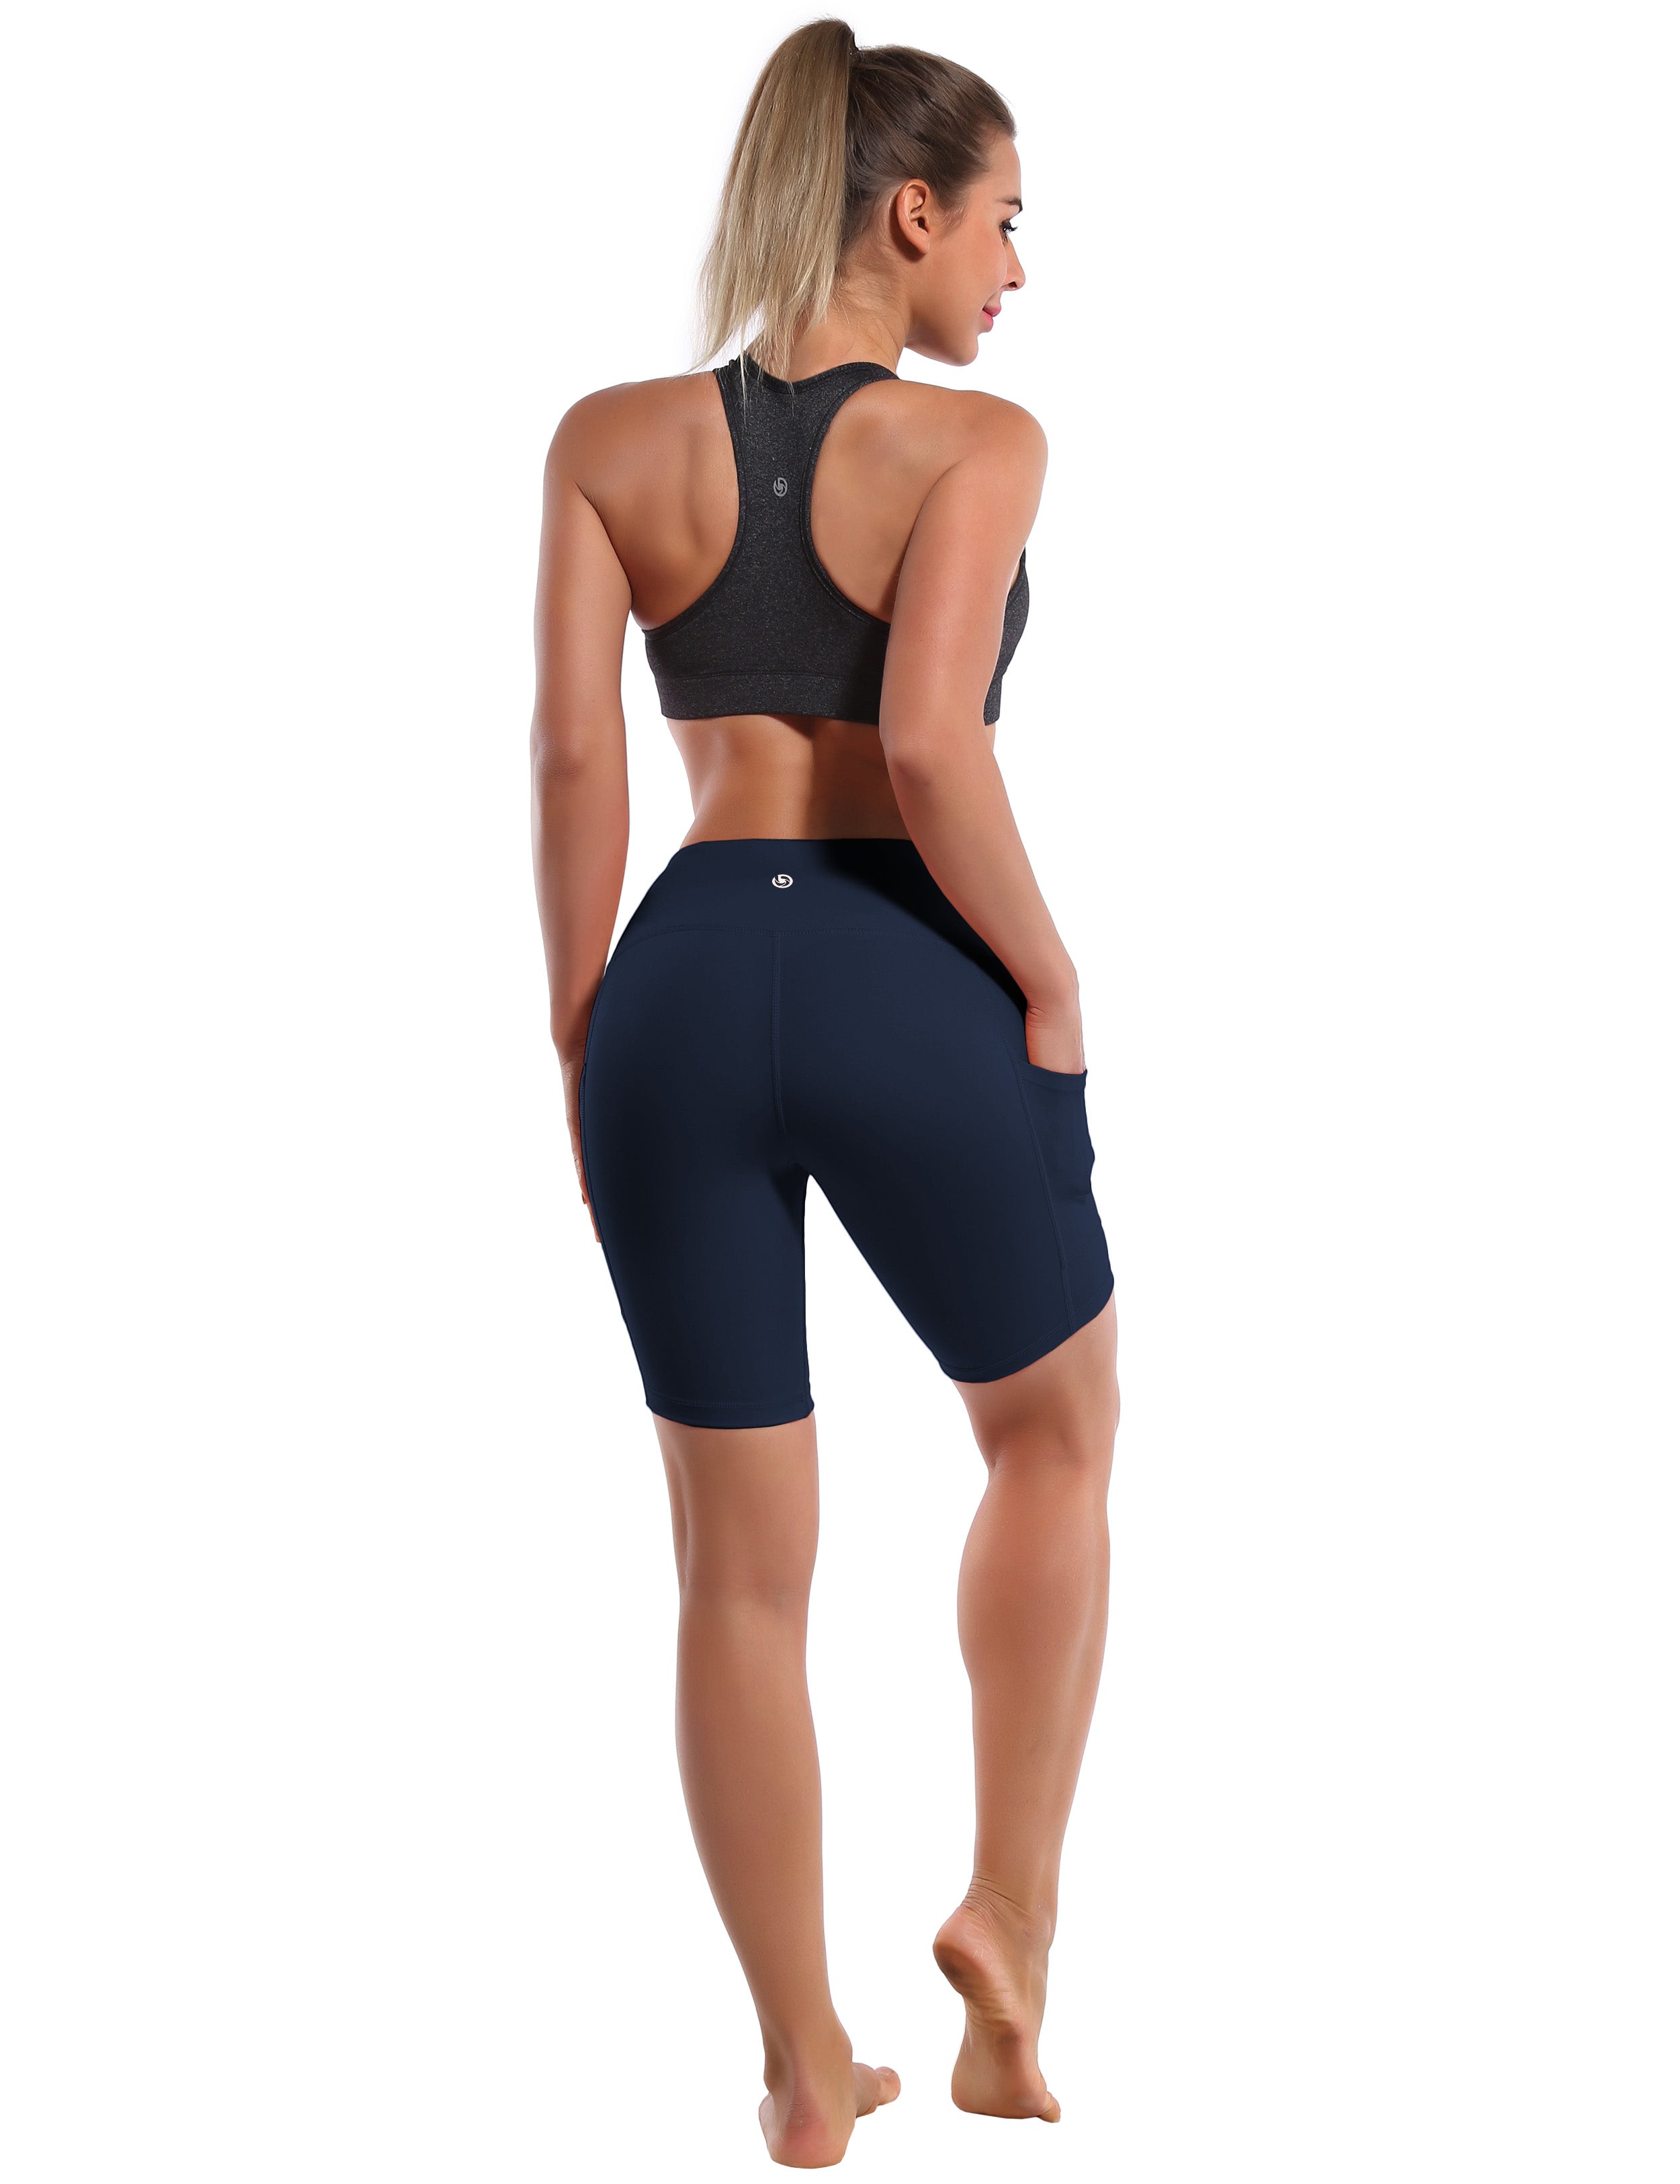 8" Side Pockets Pilates Shorts darknavy Sleek, soft, smooth and totally comfortable: our newest style is here. Softest-ever fabric High elasticity High density 4-way stretch Fabric doesn't attract lint easily No see-through Moisture-wicking Machine wash 75% Nylon, 25% Spandex